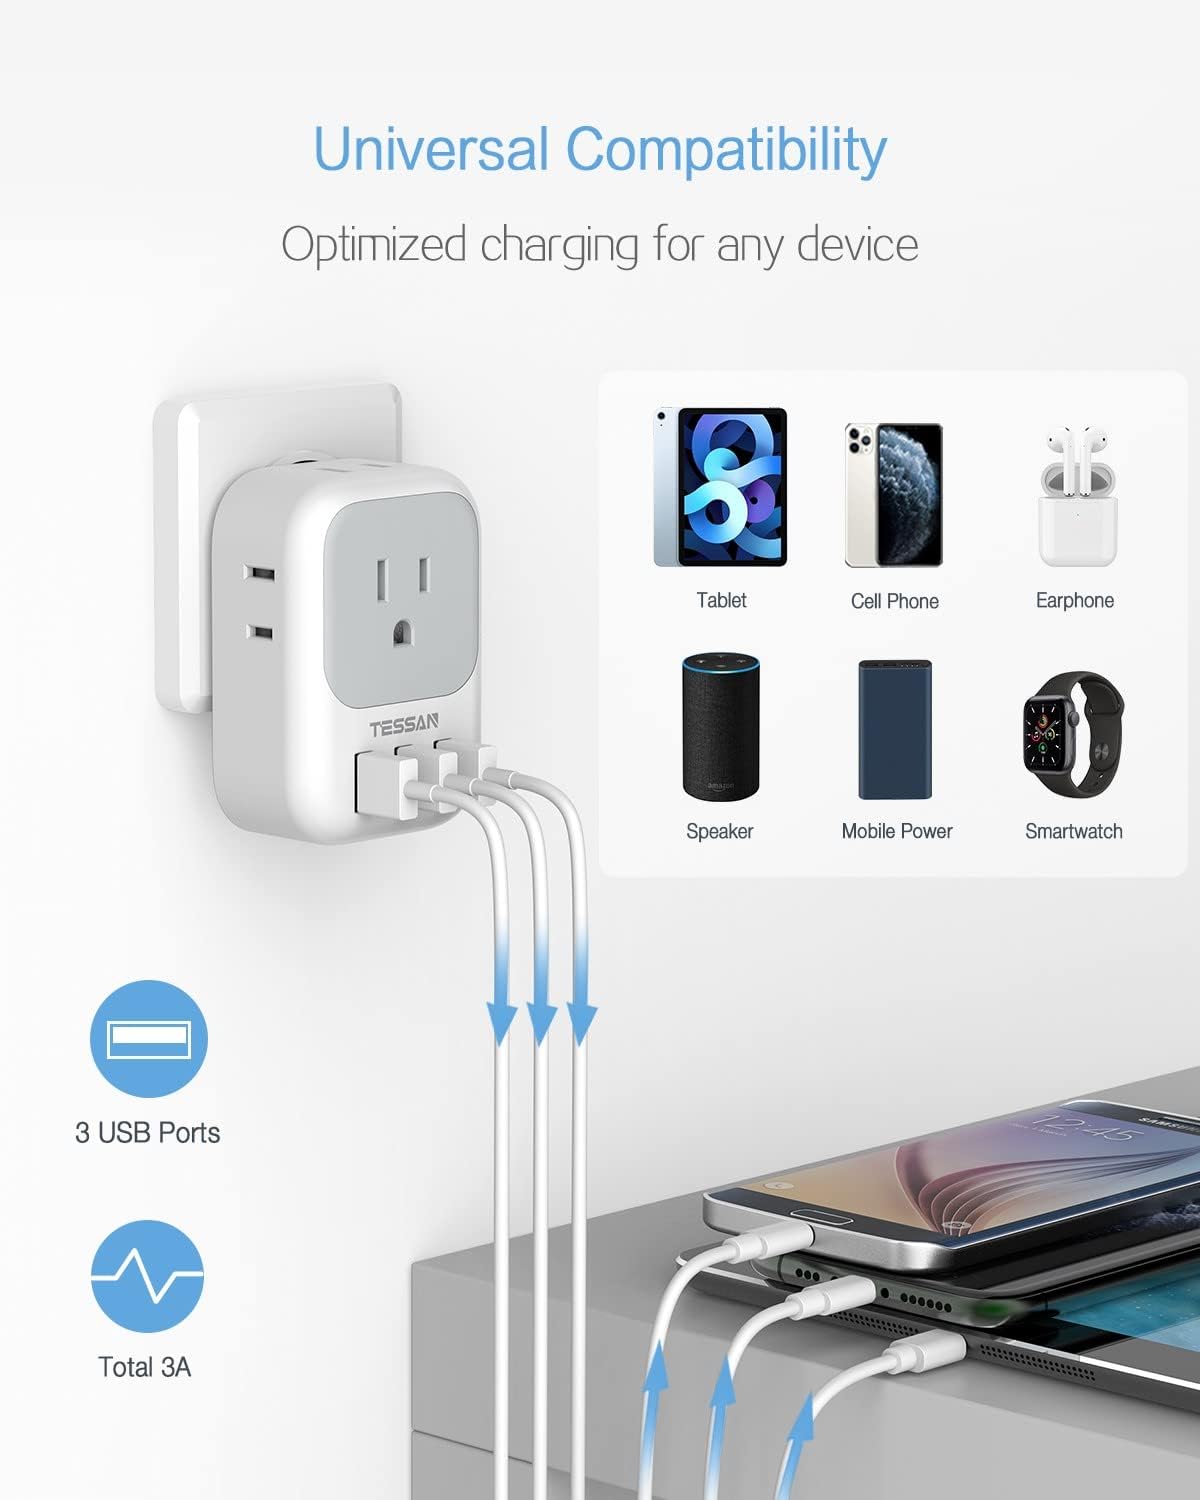 Universal Compatibility Optimized charging for any device